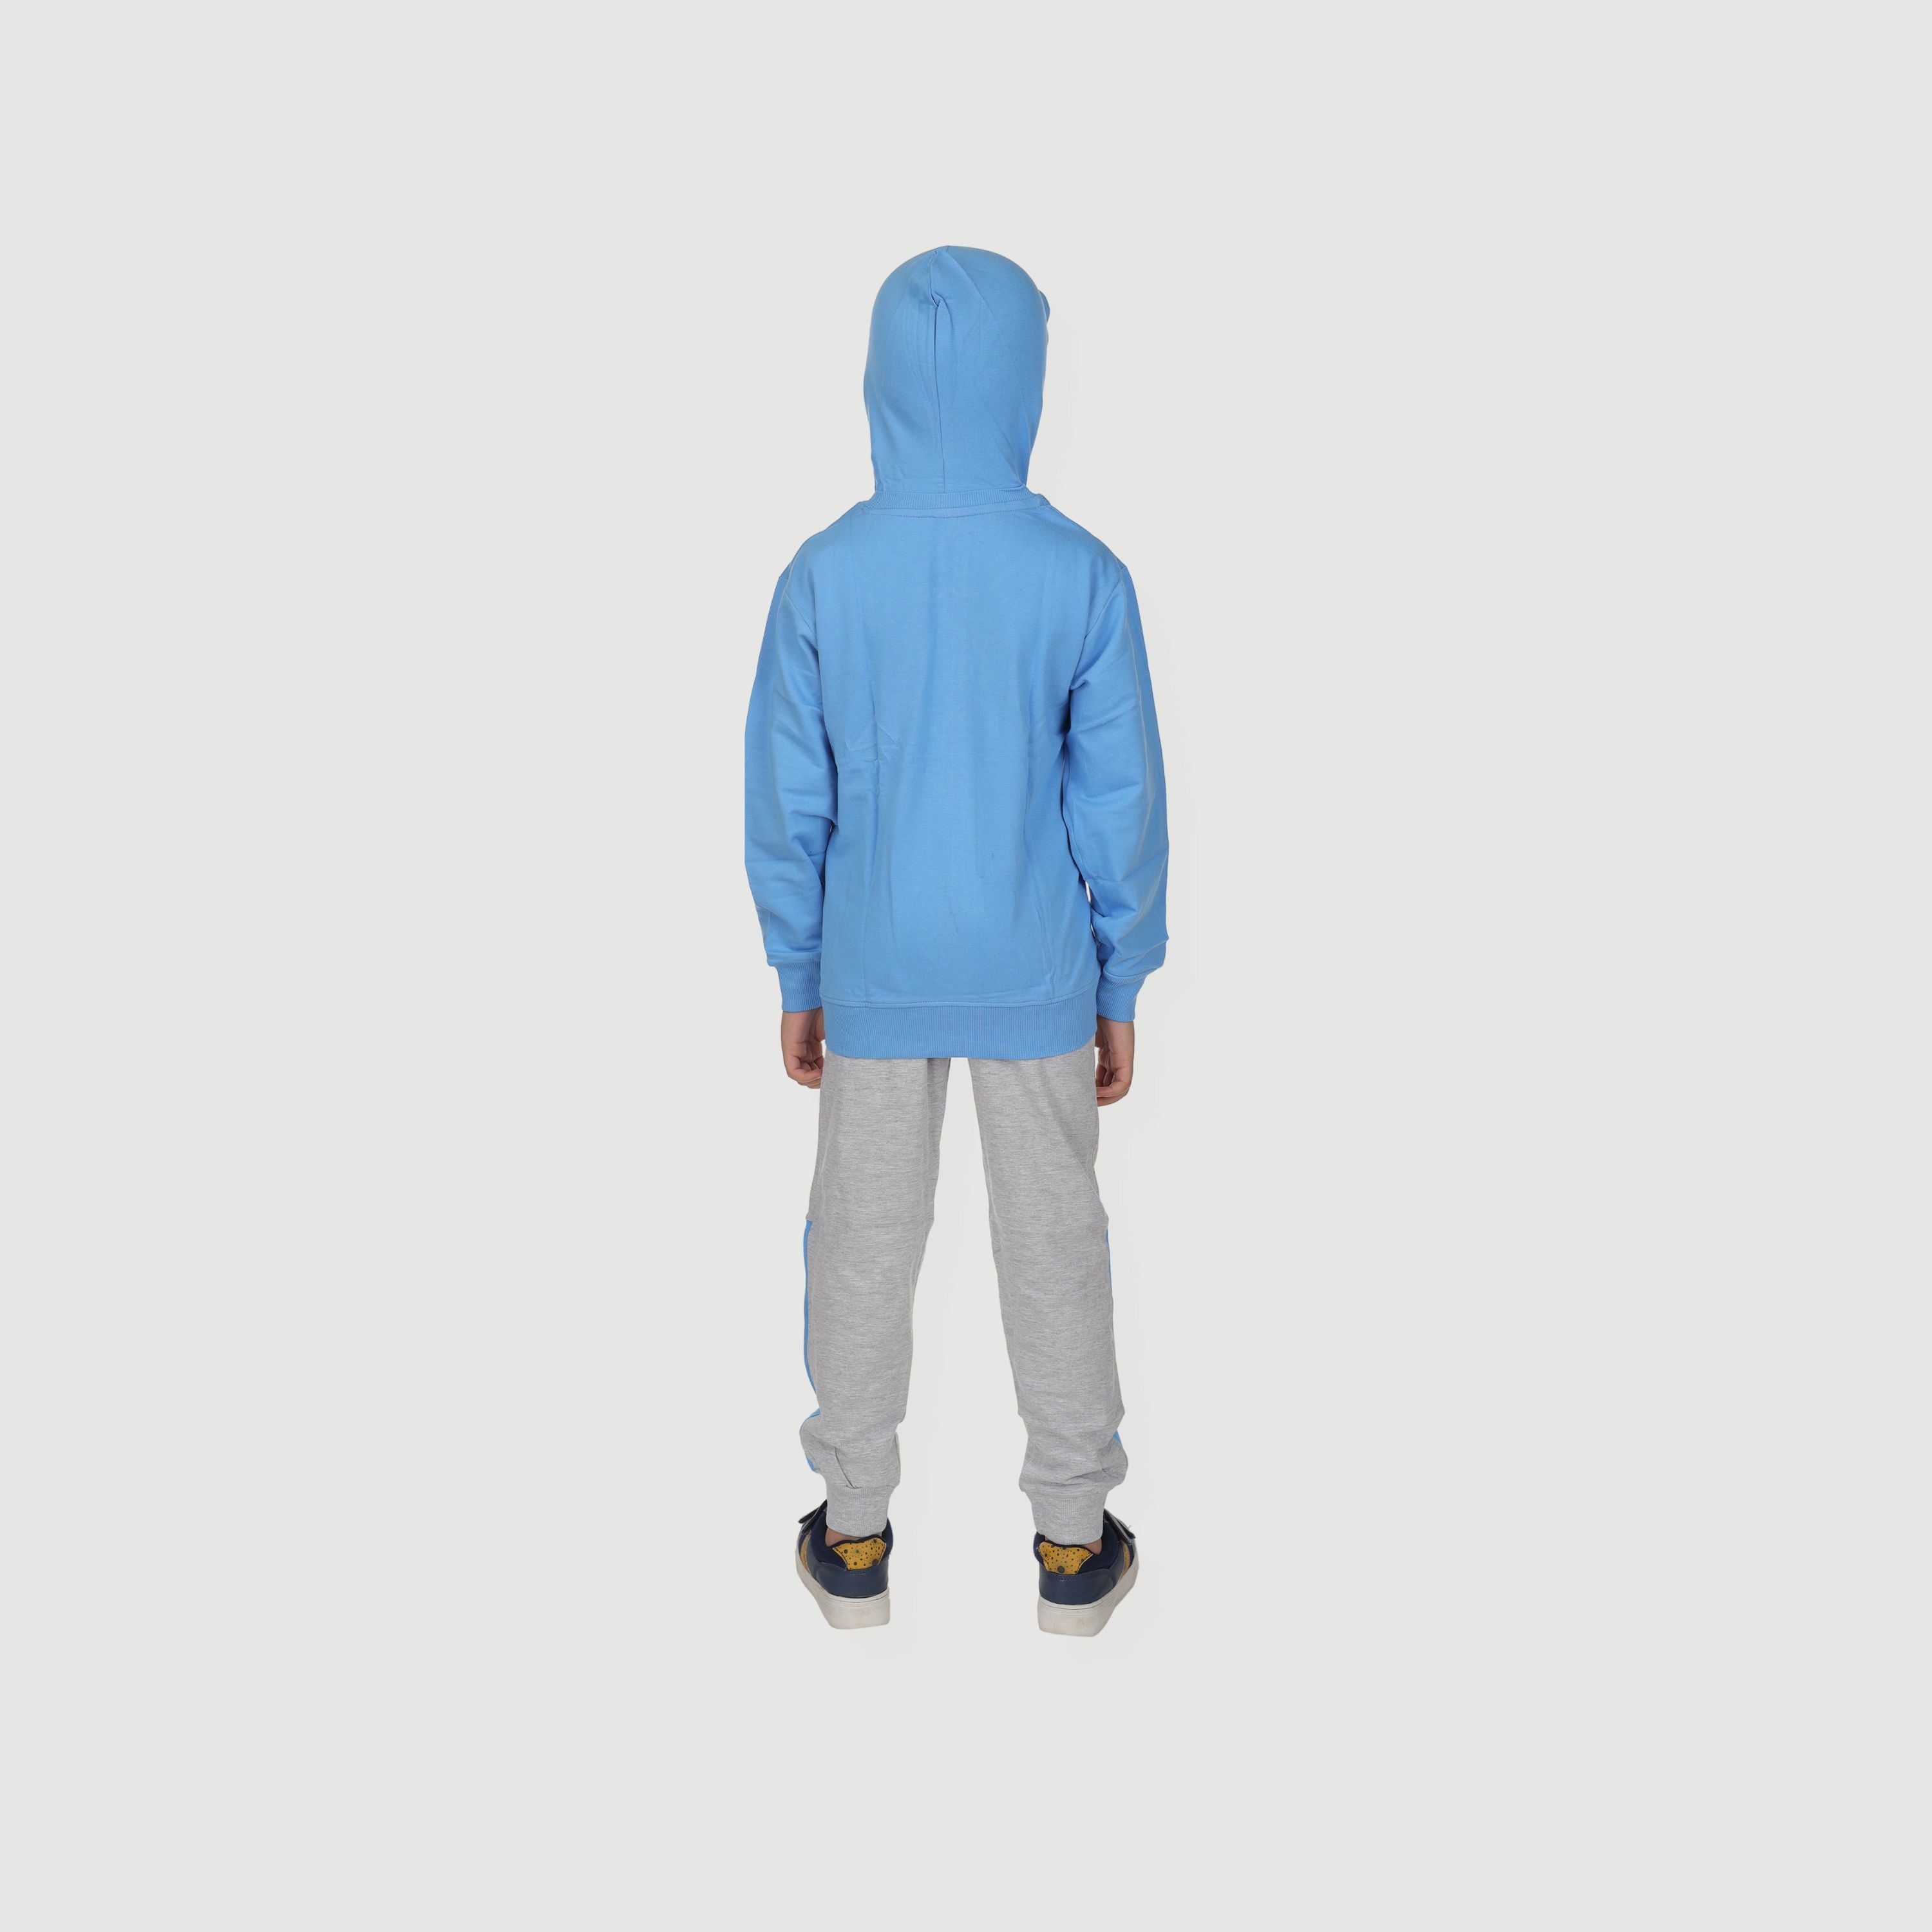 HOODED CLOTHING SET FOR BOY - BLUE